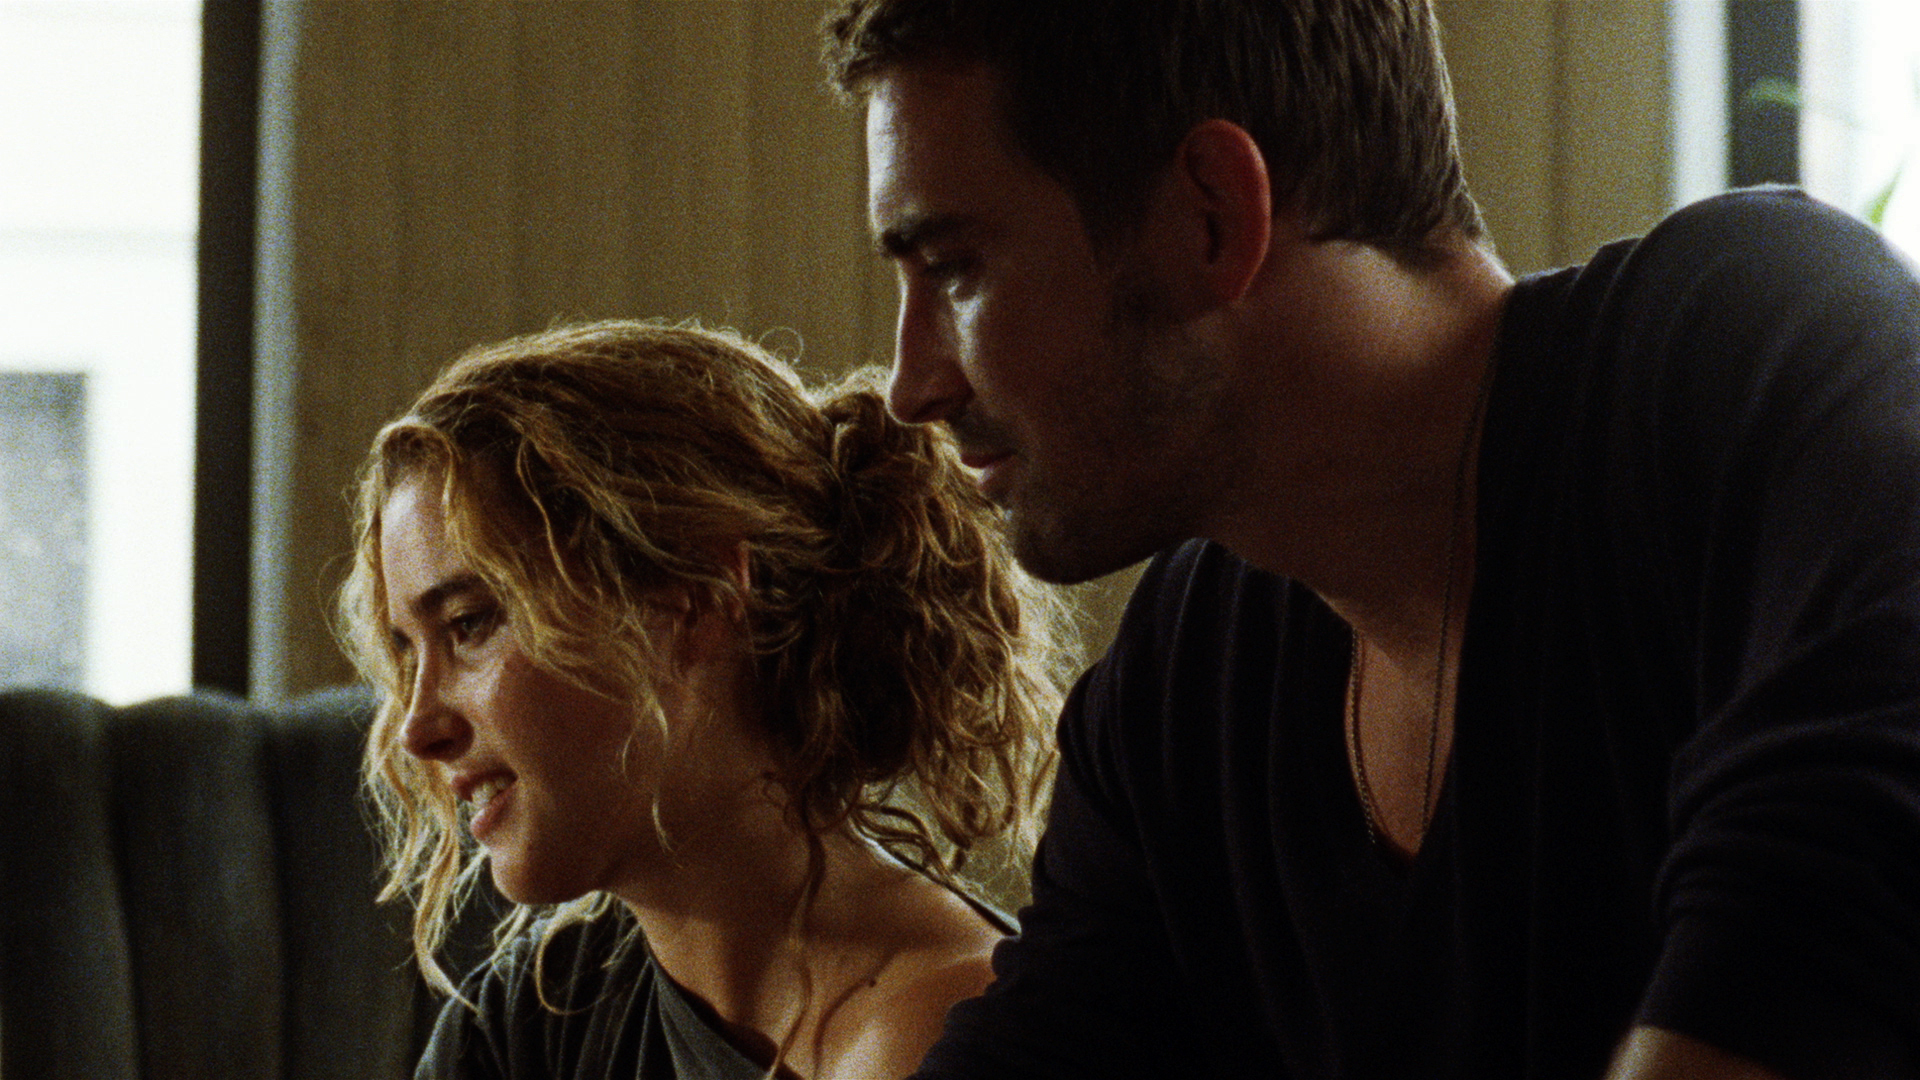 Still of Vahina Giocante and Lee Pace in 30 sirdies duziu (2012)